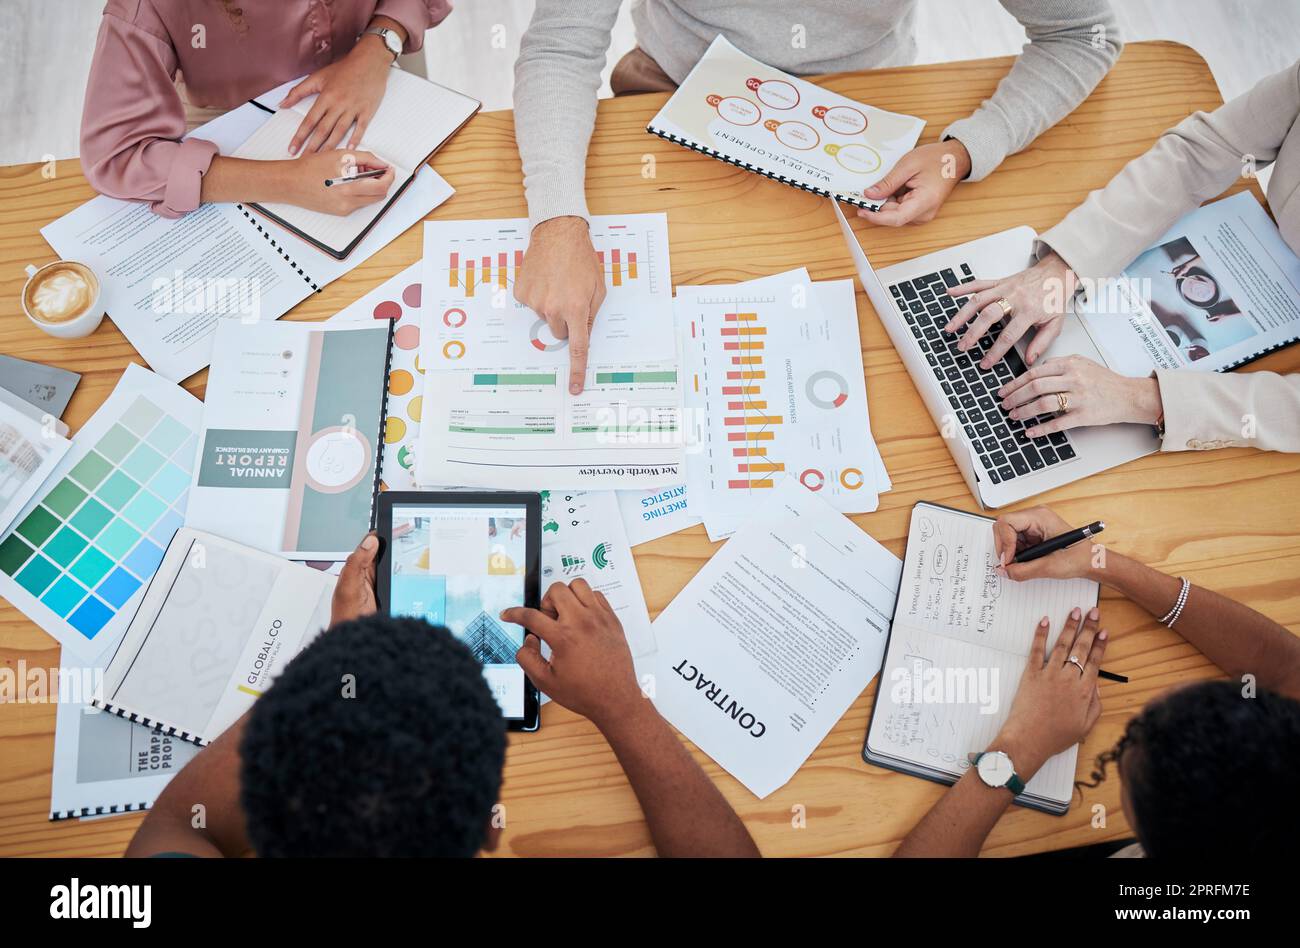 Meeting, planning and finance with a group or team of business people discussing data, a contract or financial report from above. Overhead of a boardroom meeting for strategy, growth and development Stock Photo